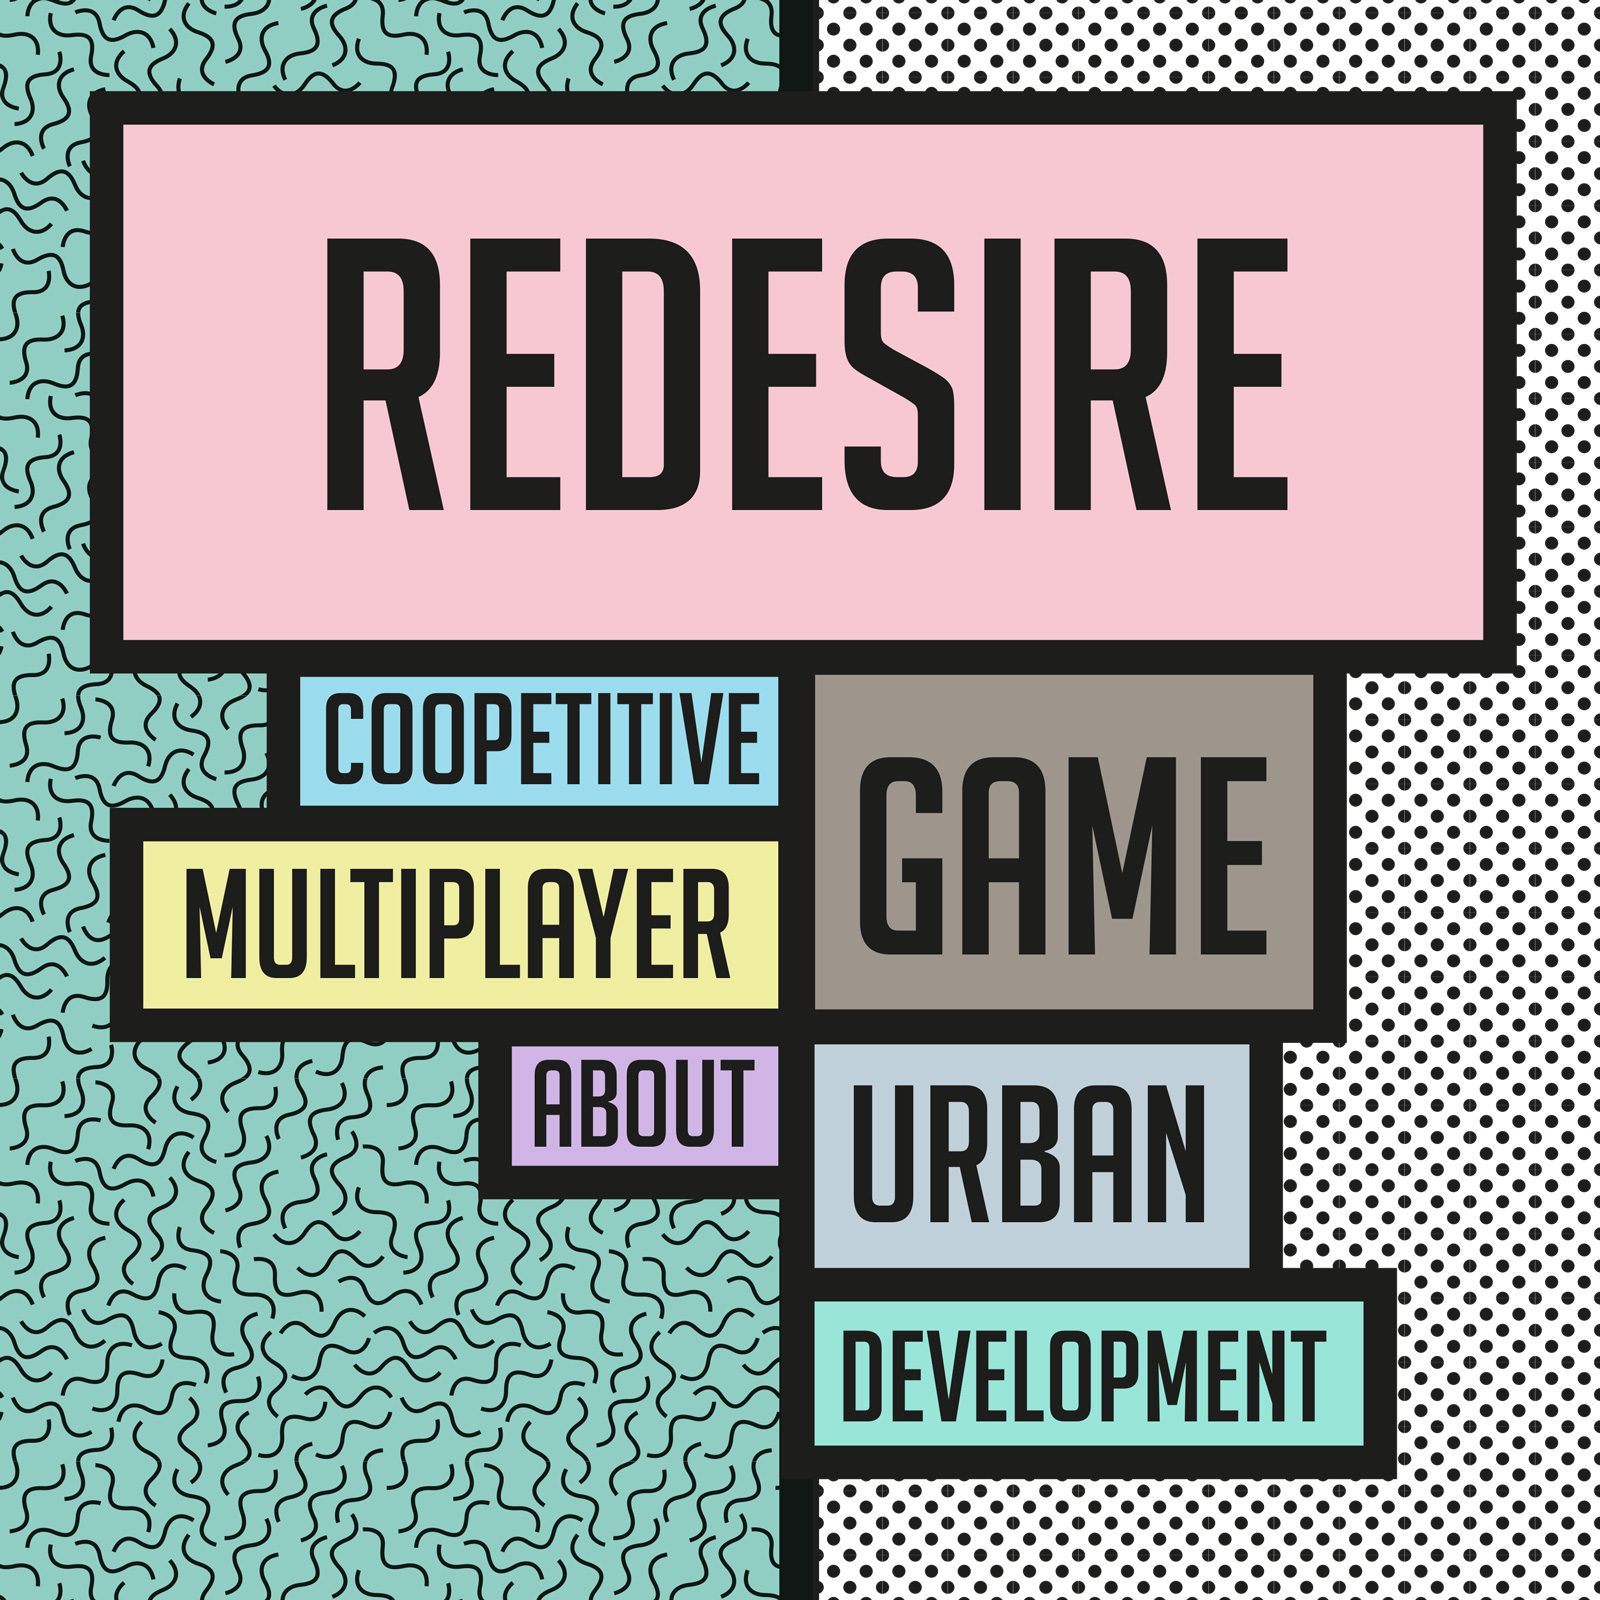 Redesire